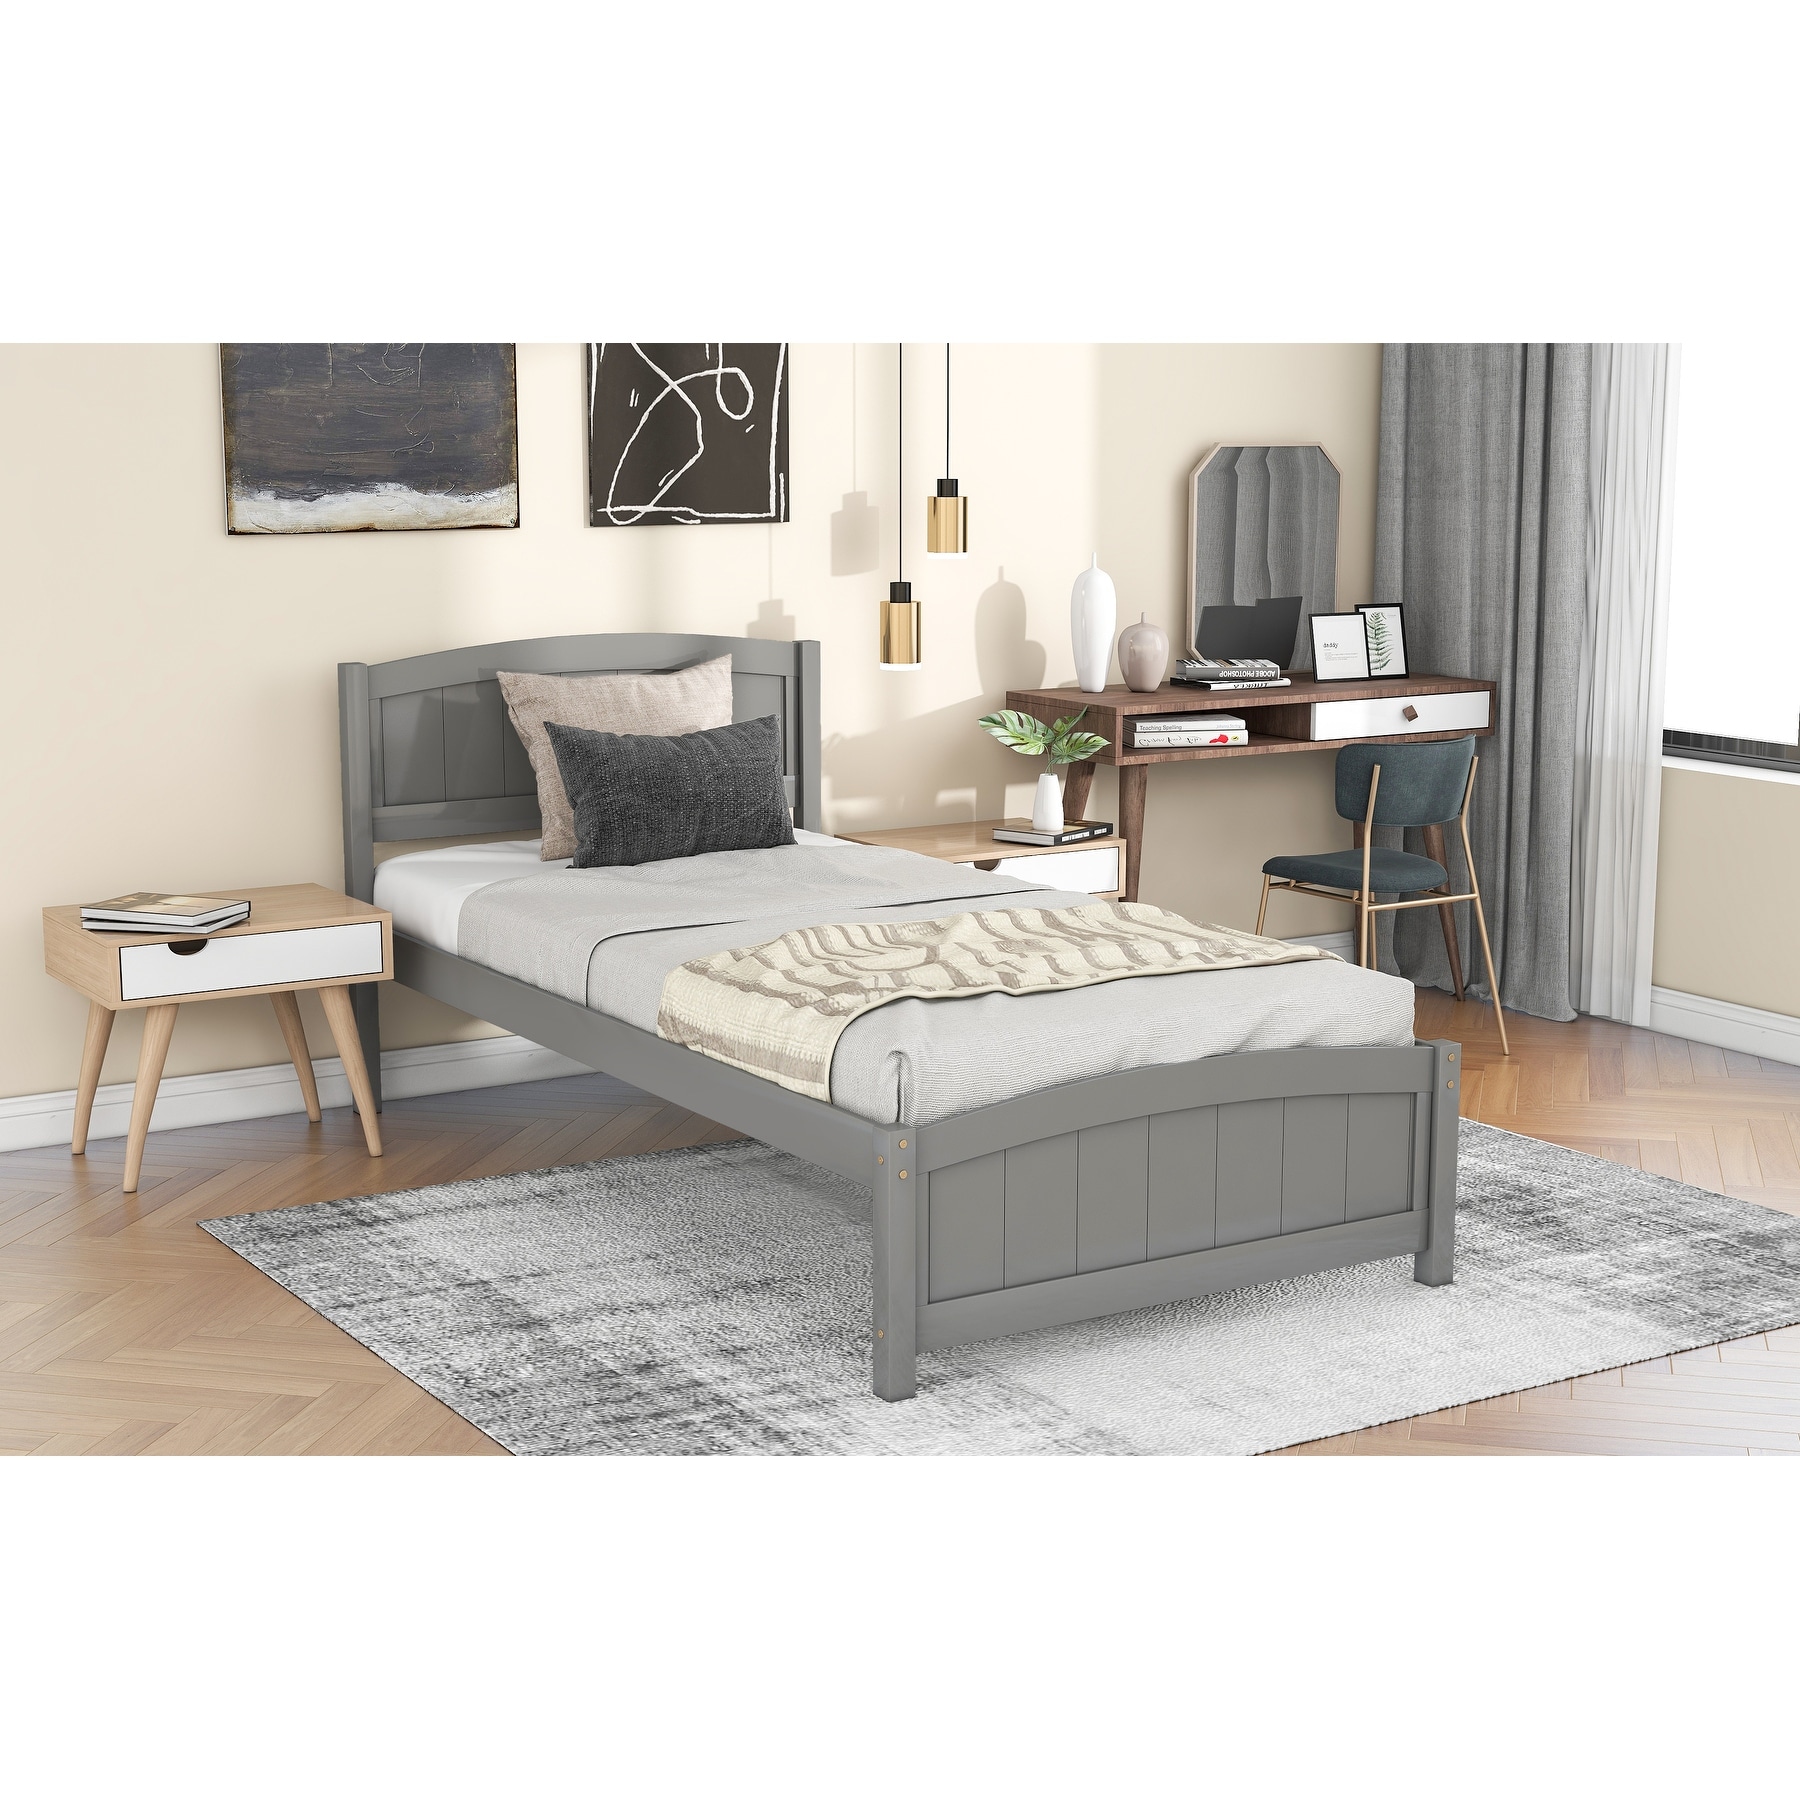 Modern Comfort Twin Bed Pine Wood Twin Platform Bed with Concise Headboard Footboard, Wood Slat Support&Under-bed Storage